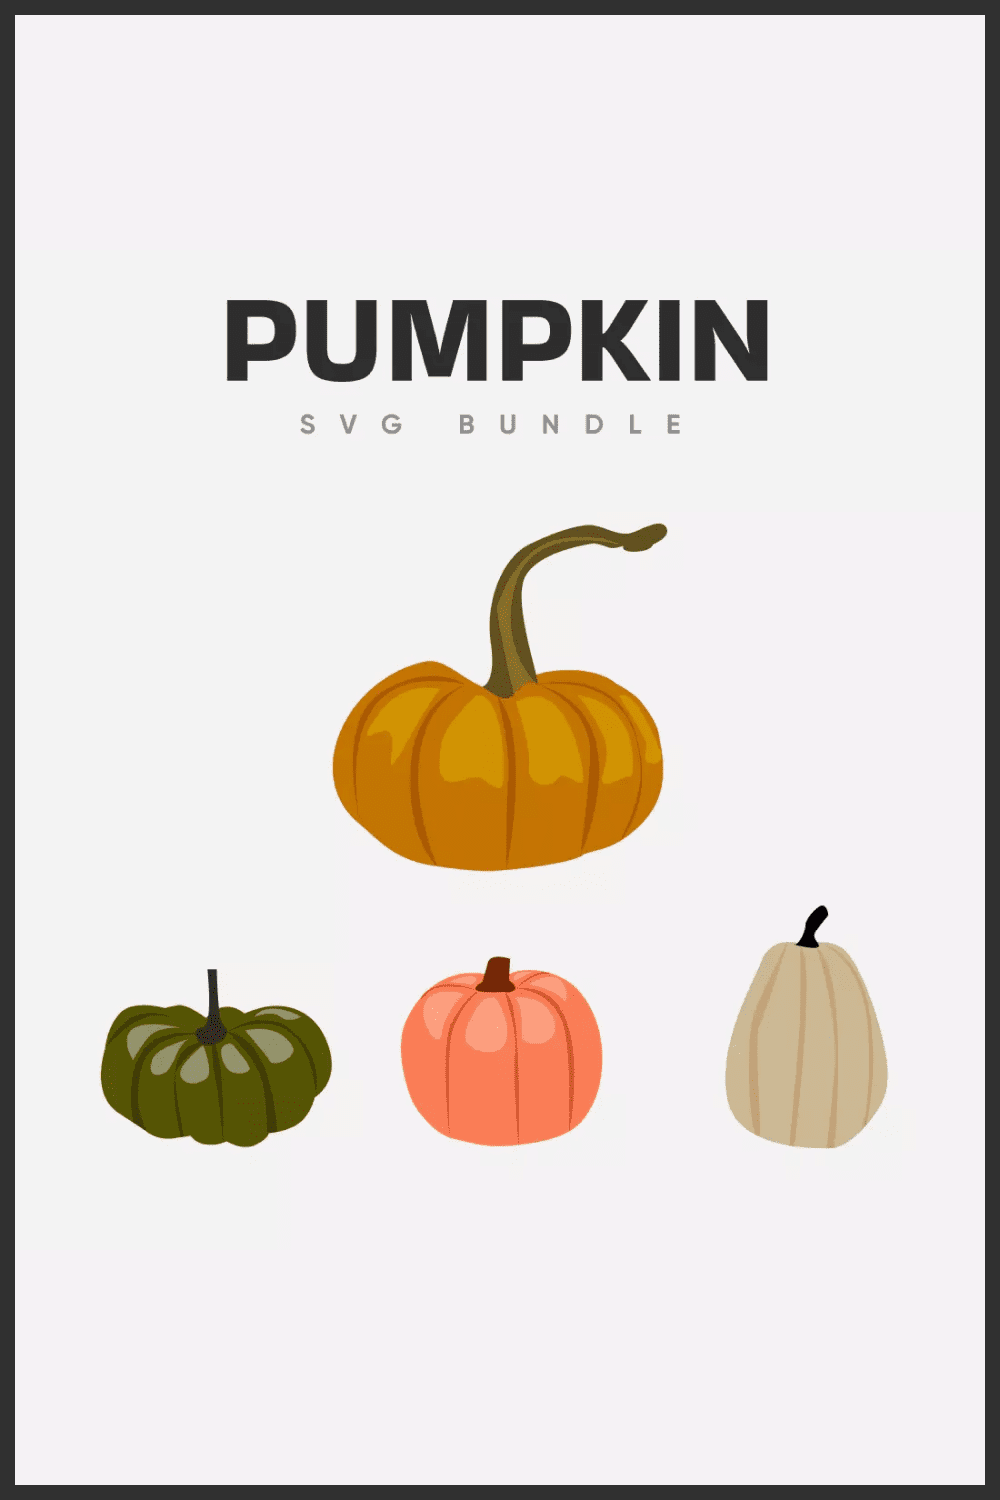 Collage of painted pumpkins in vector graphics.